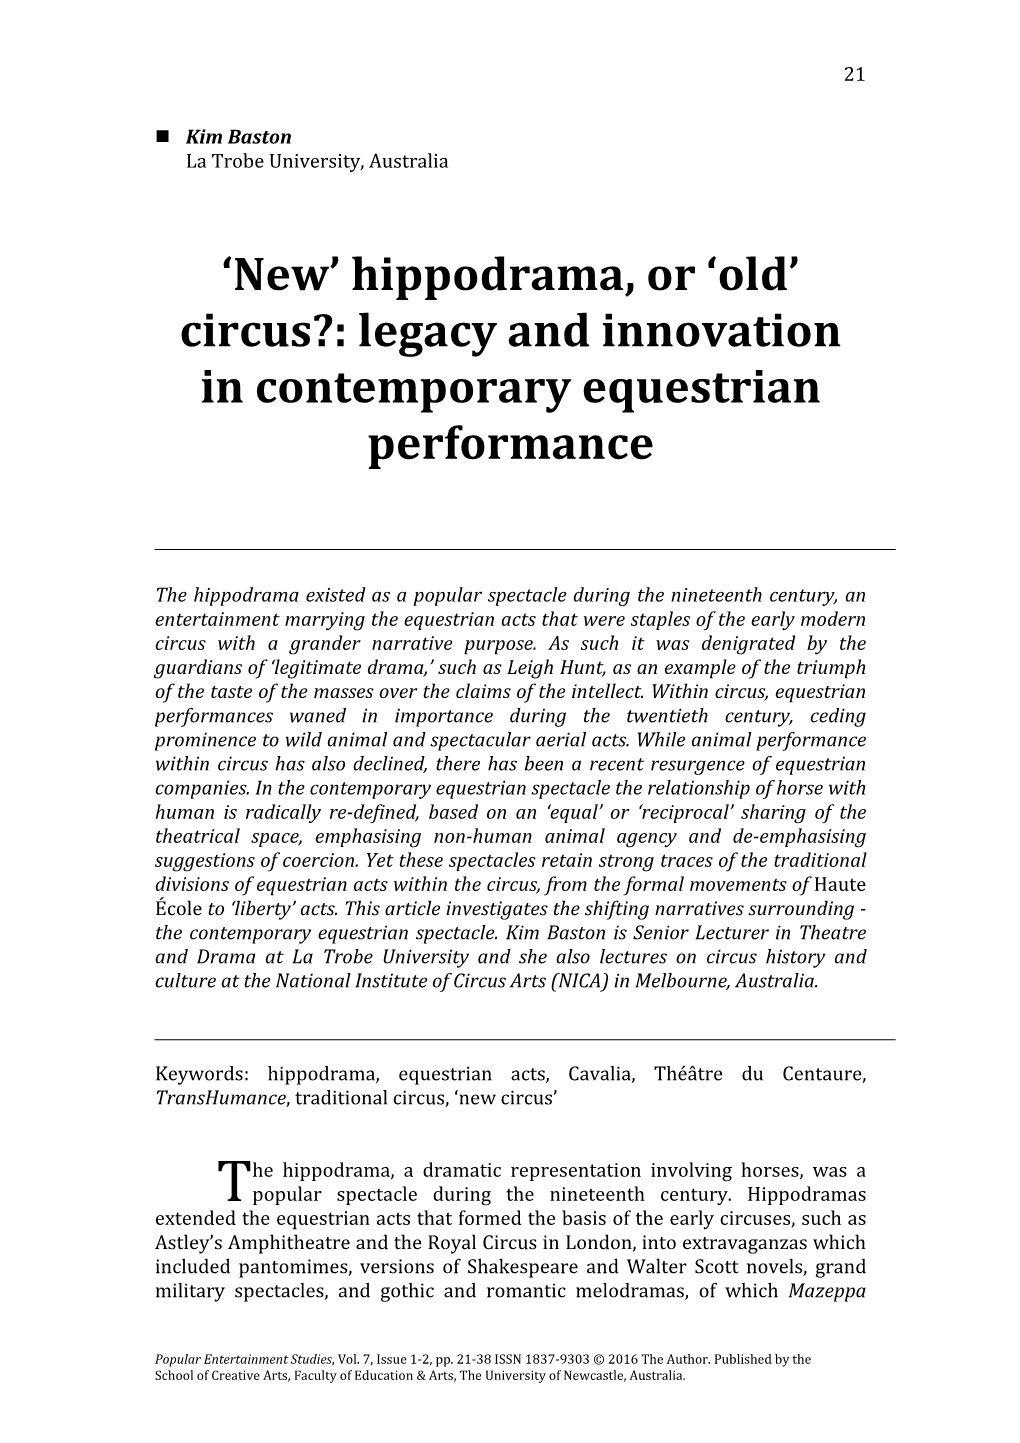 Hippodrama, Or ‘Old’ Circus?: Legacy and Innovation in Contemporary Equestrian Performance